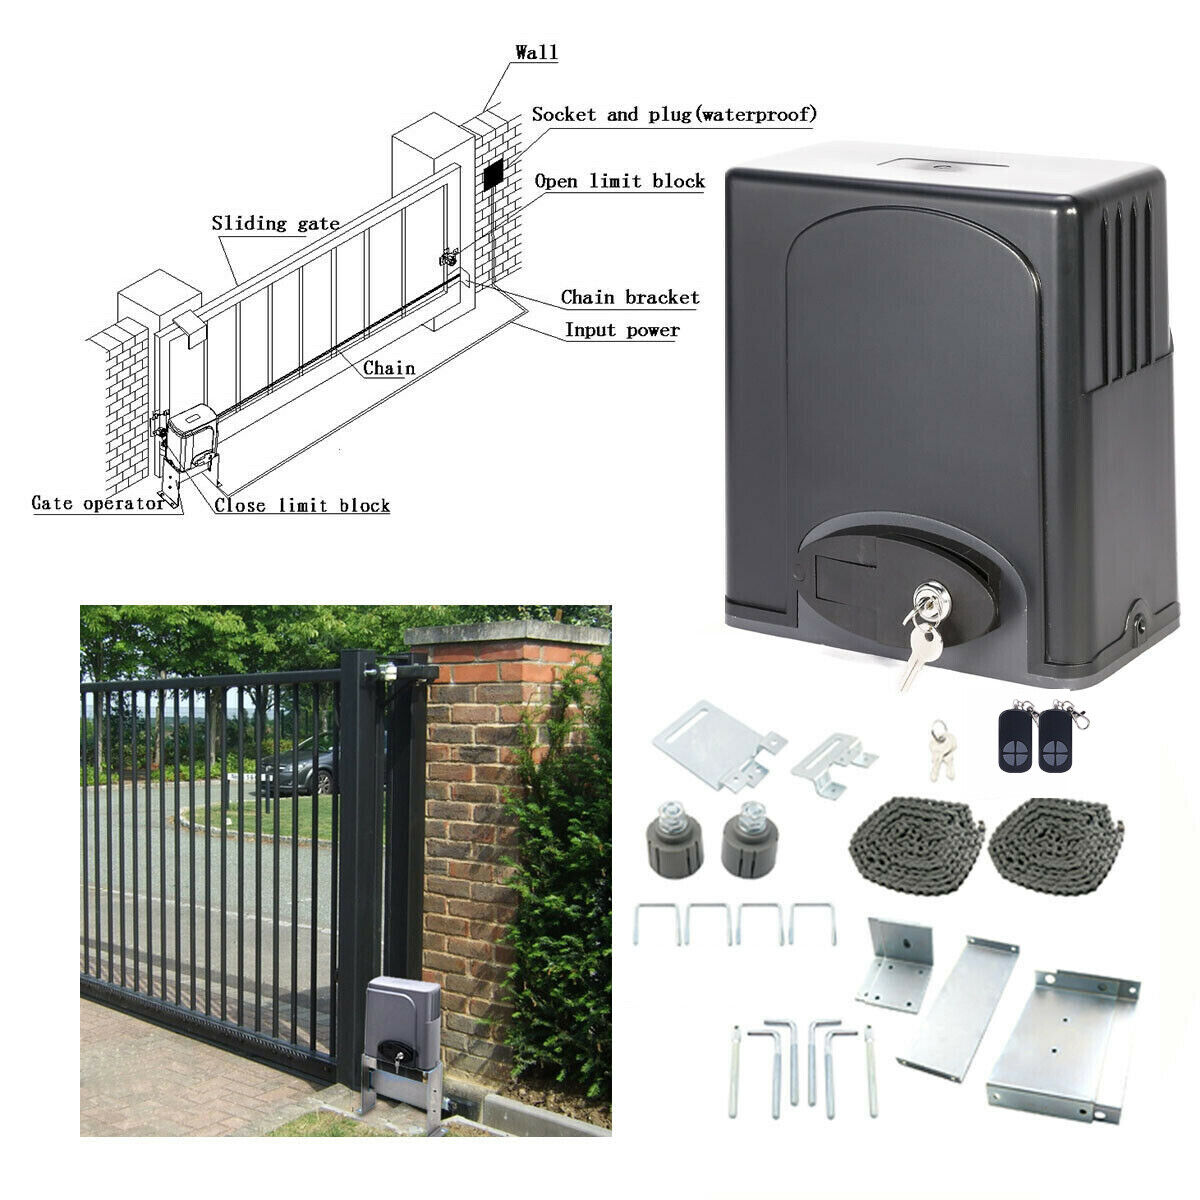 Sliding Gate Opener Price reduction Electric Operator Remote Control w New product Automati